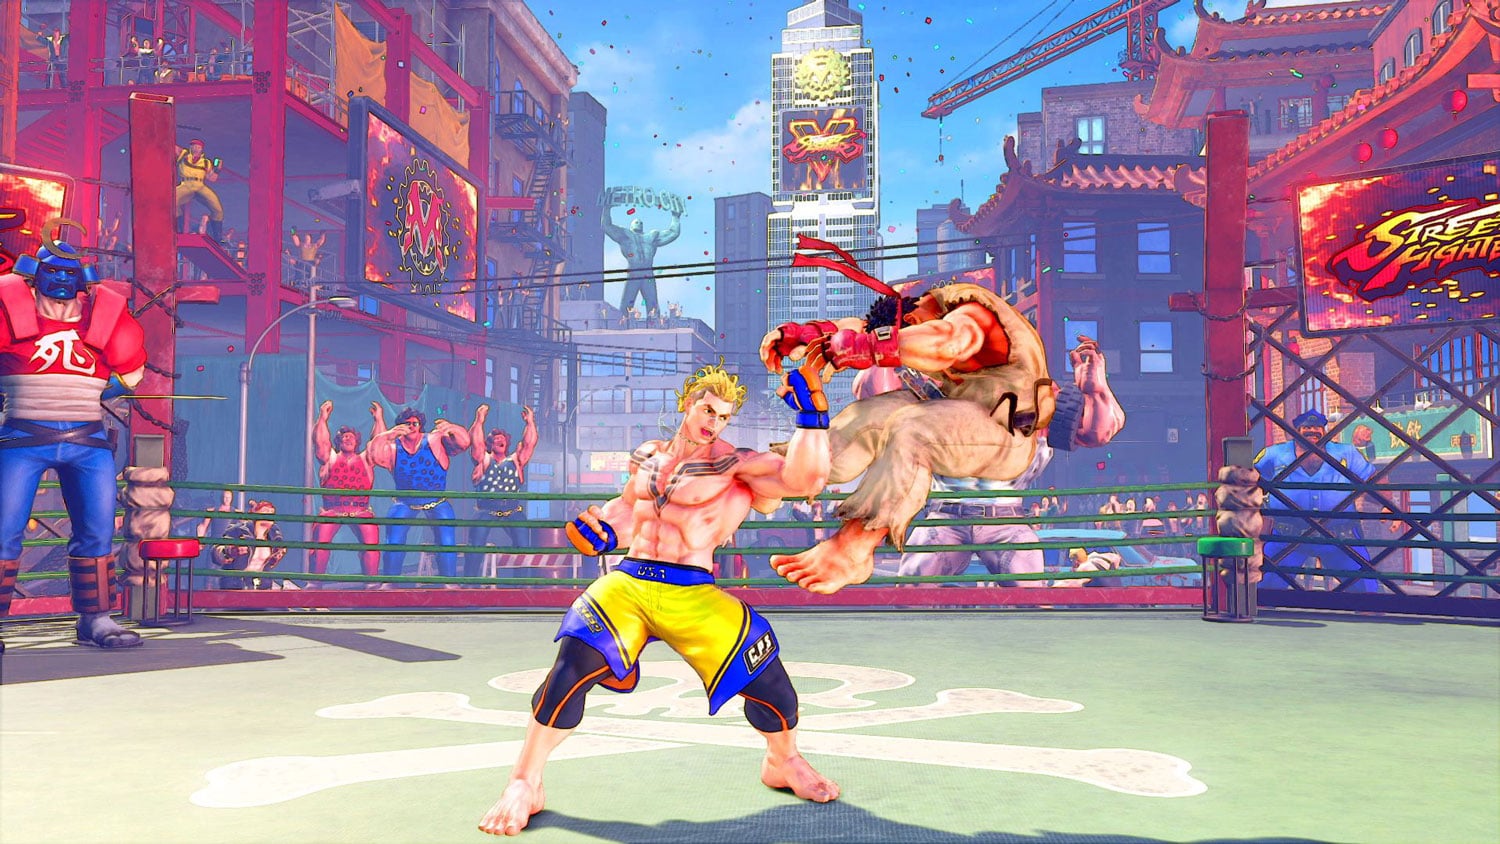 Street-Fighter-Video-Game